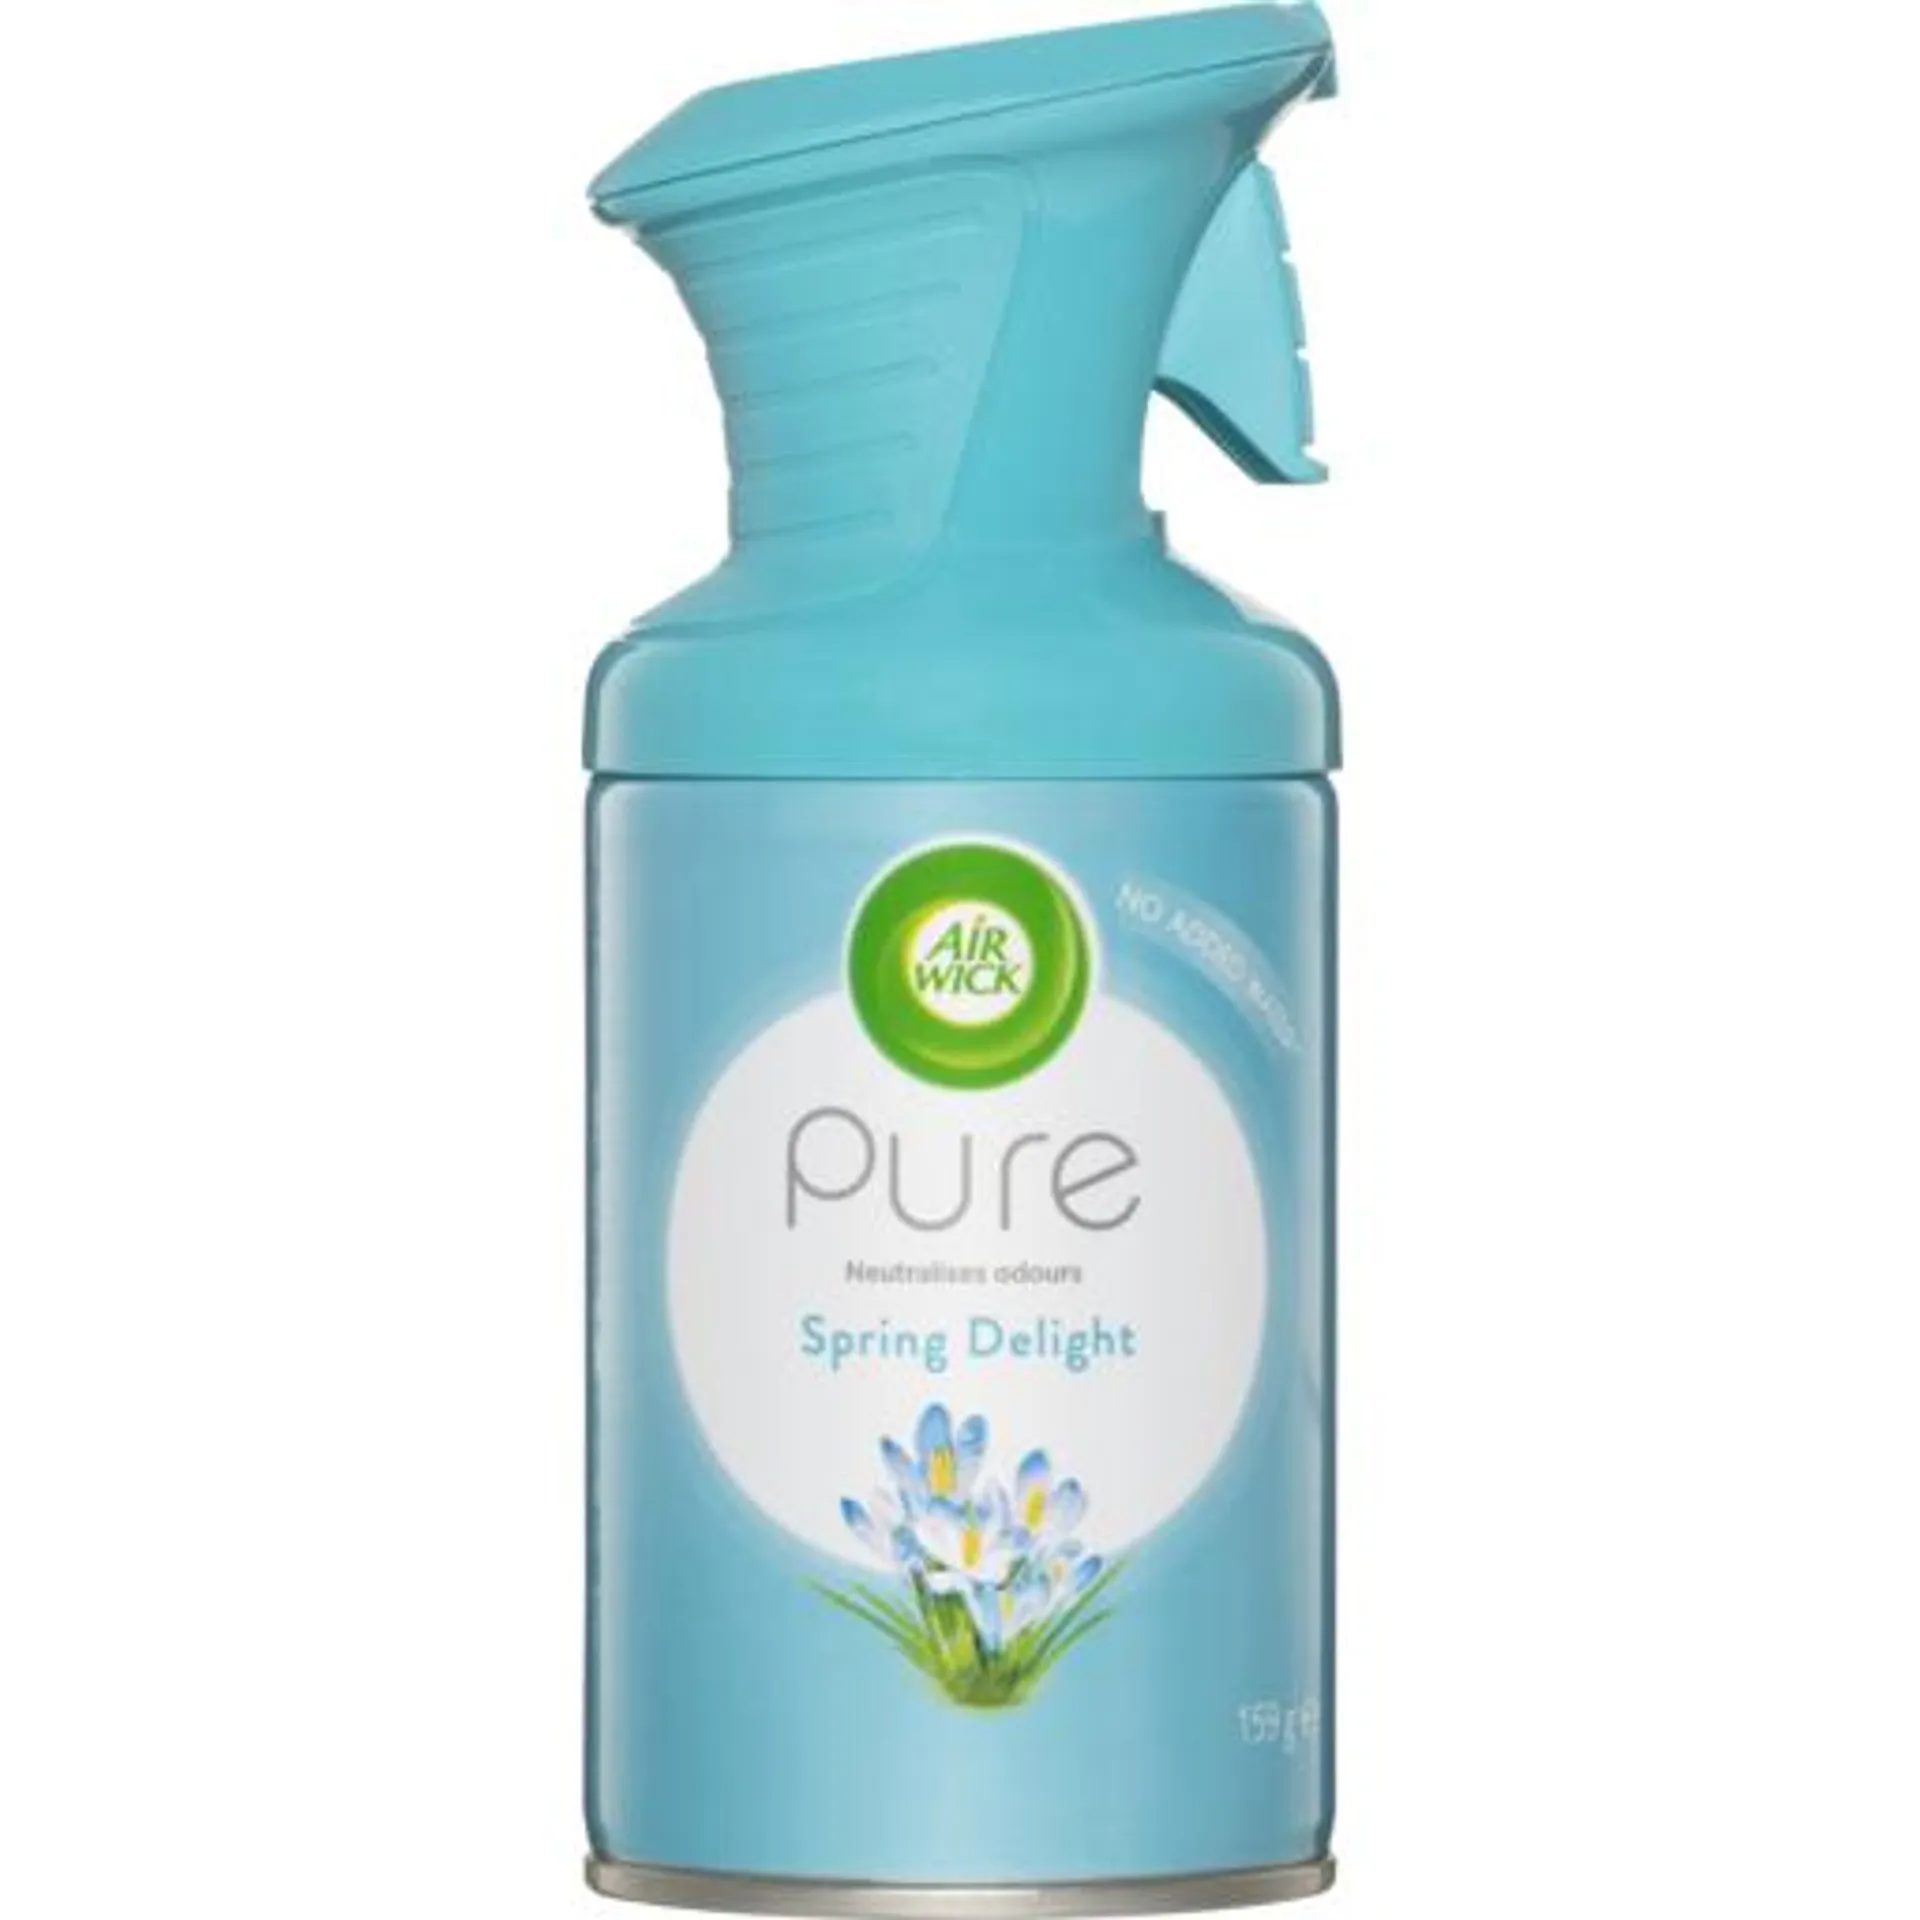 Air Wick Pure Air Freshener Spray Spring Delight 159g